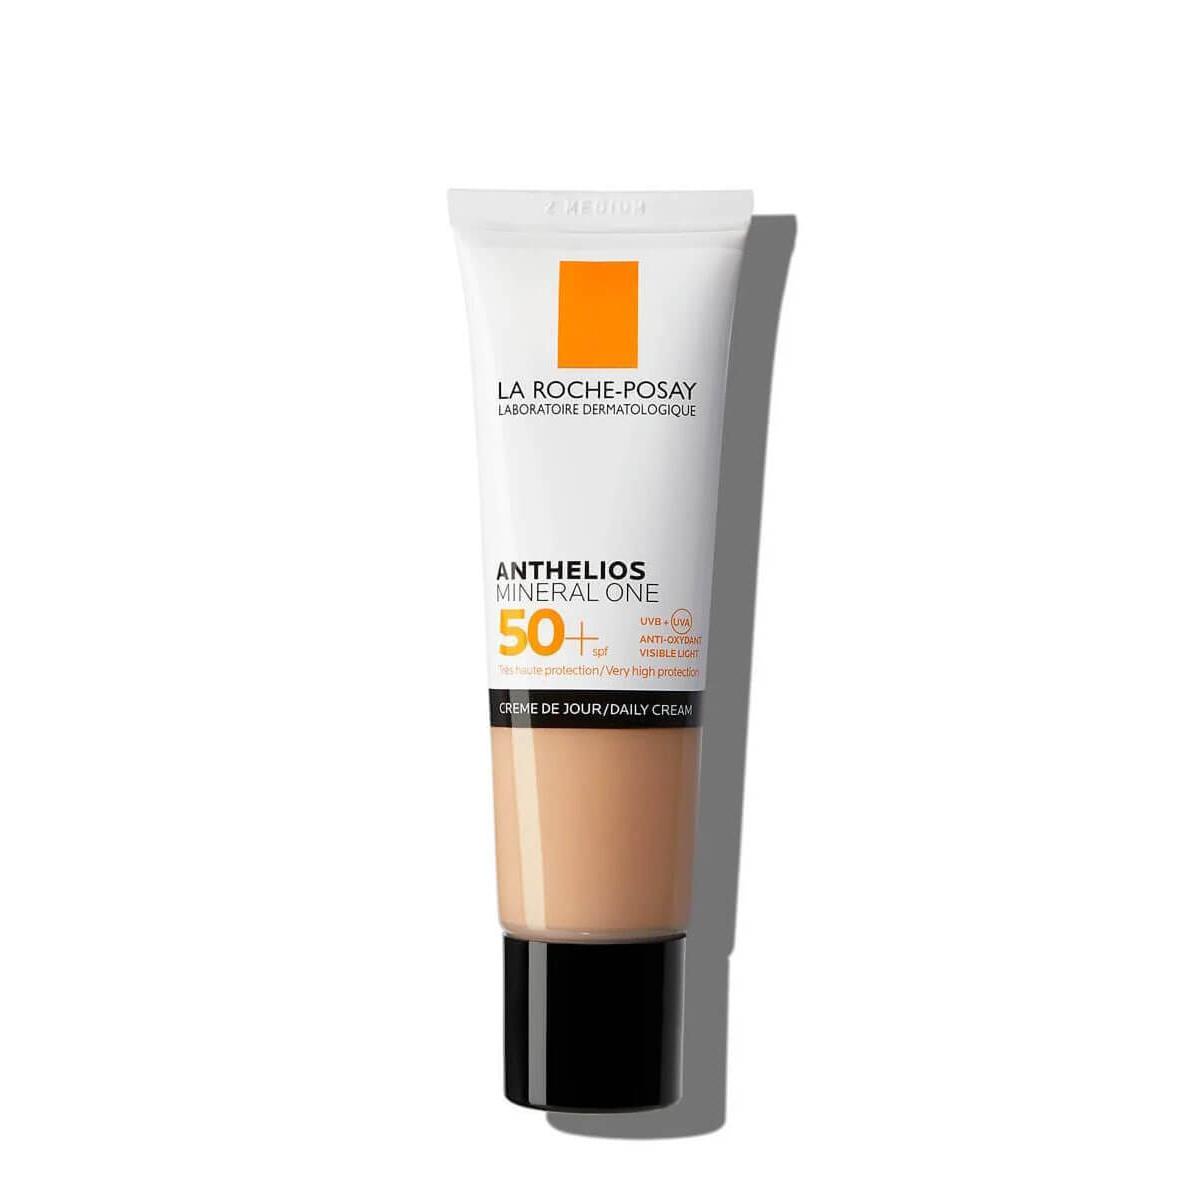 Anthelios - La roche posay anthelios mineral one color 02 medium spf50+ 30 ml